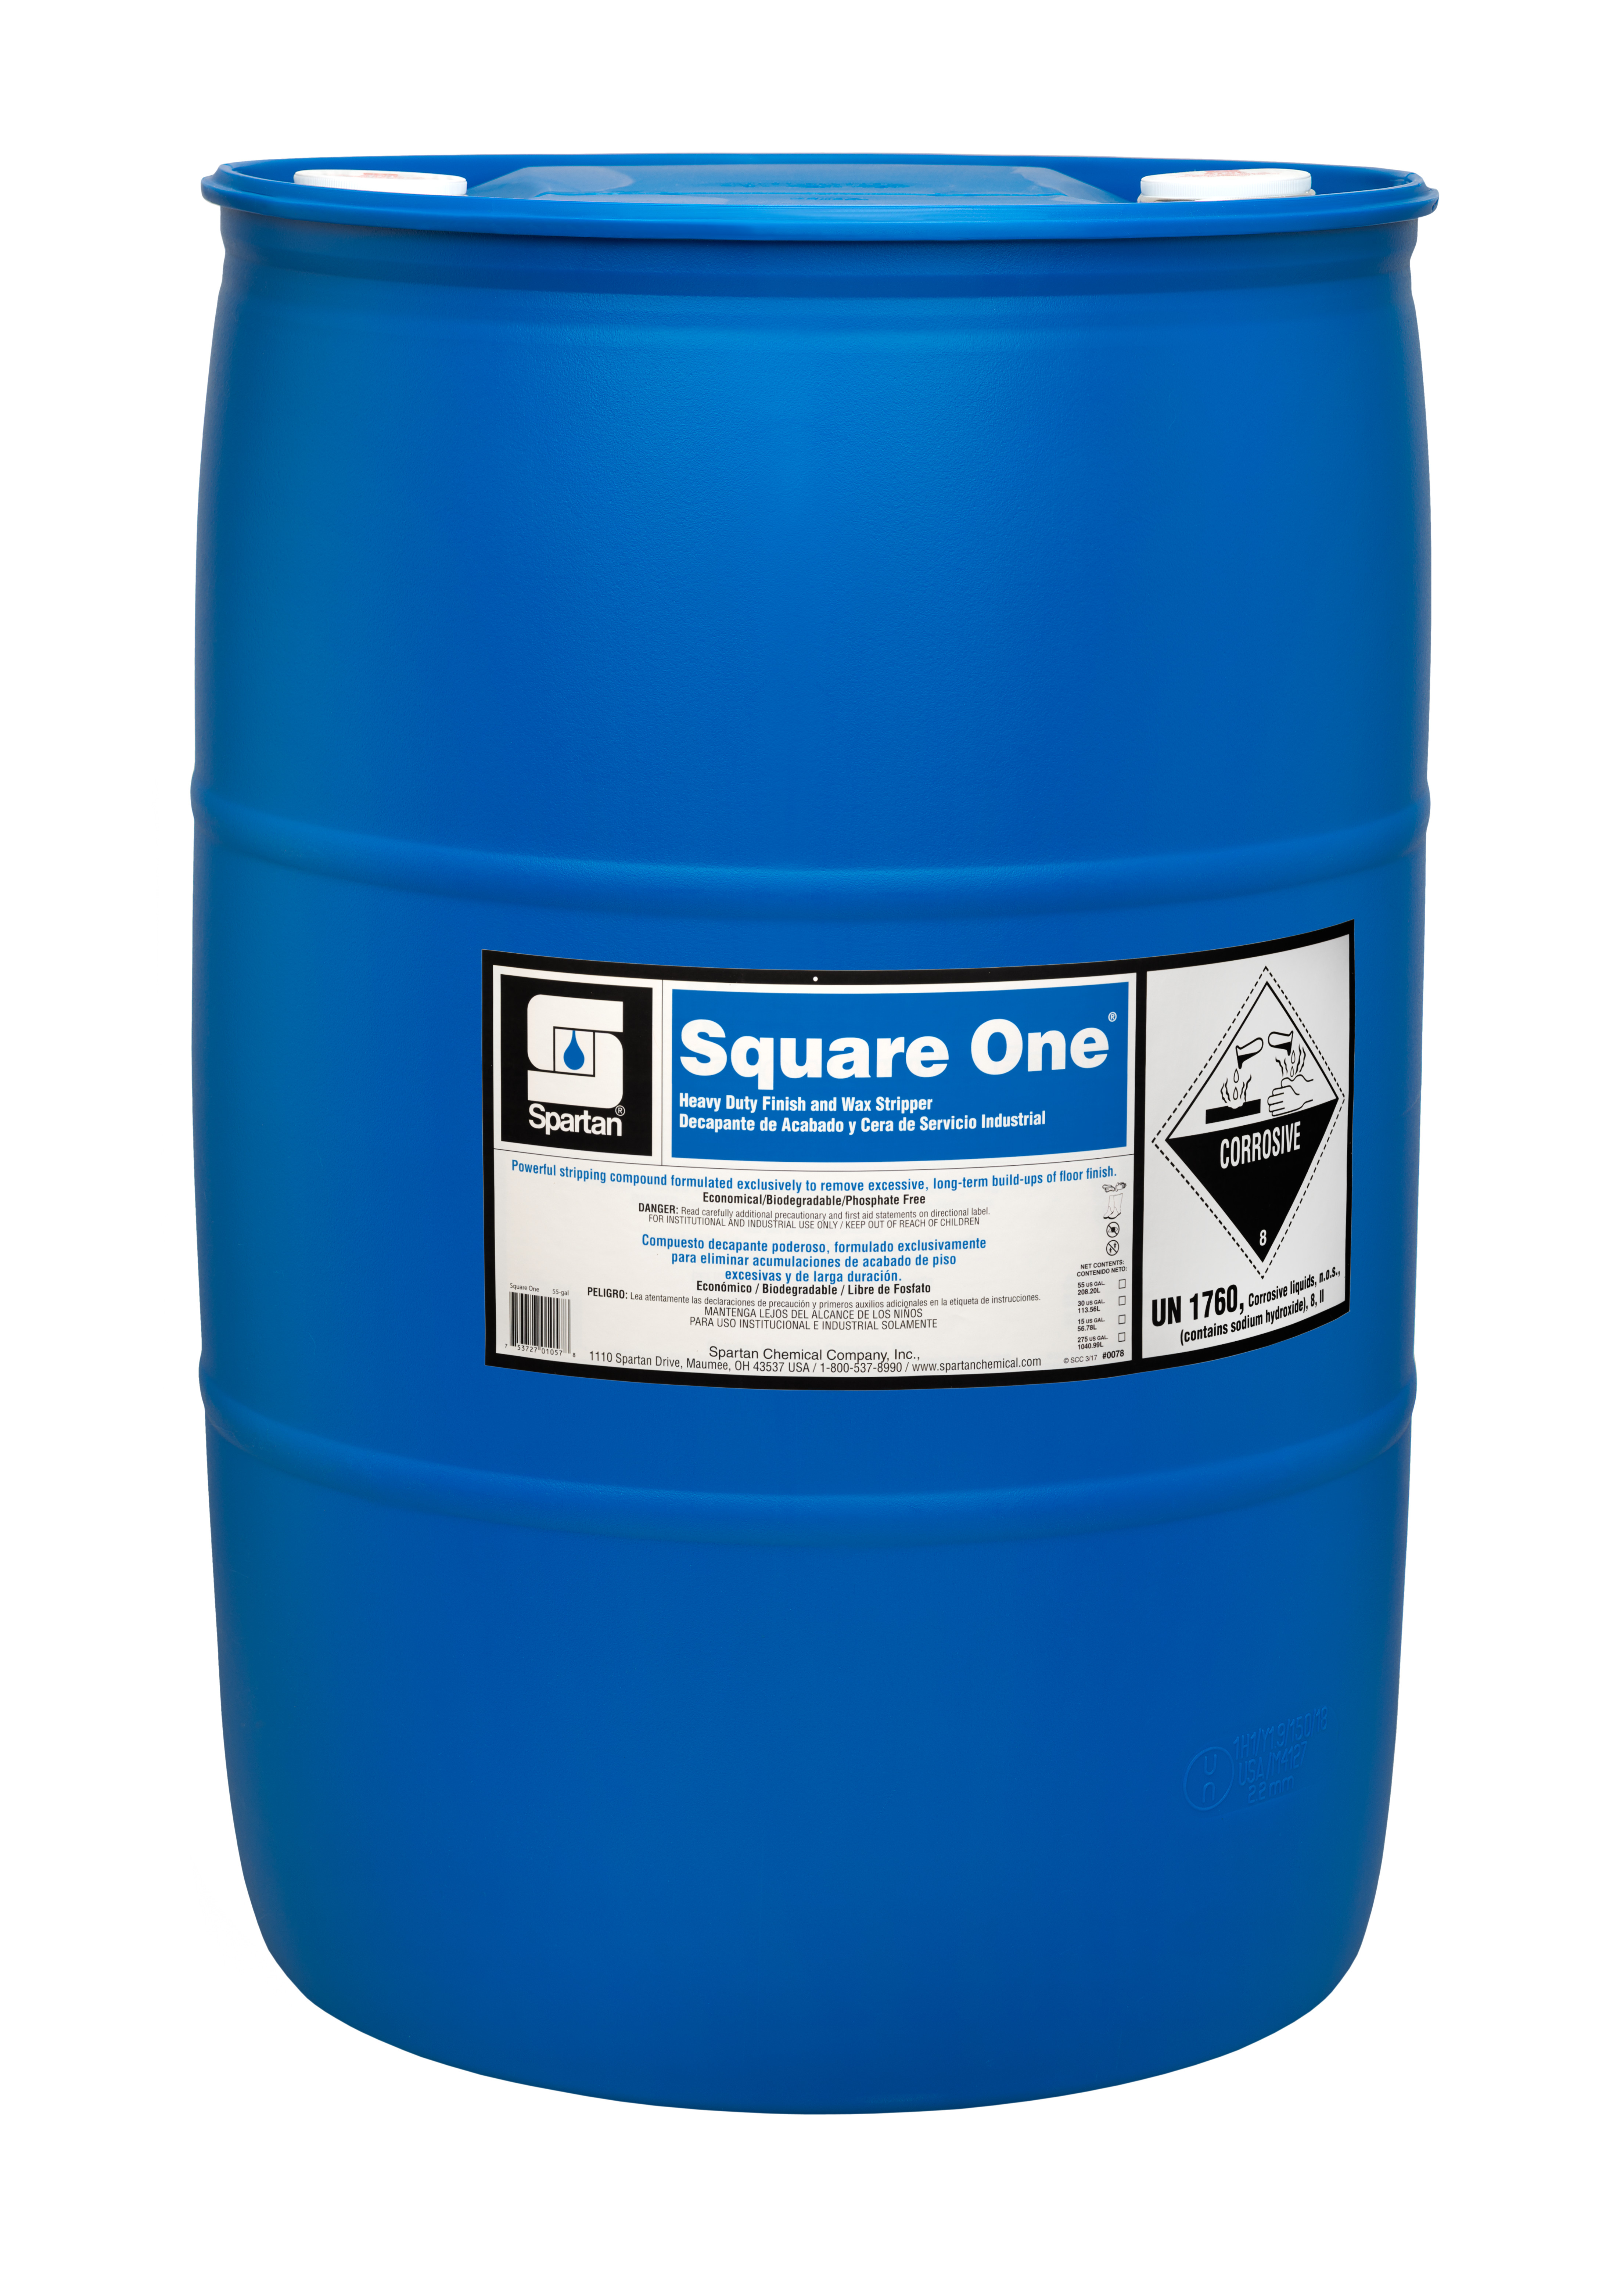 Spartan Chemical Company Square One, 55 GAL DRUM